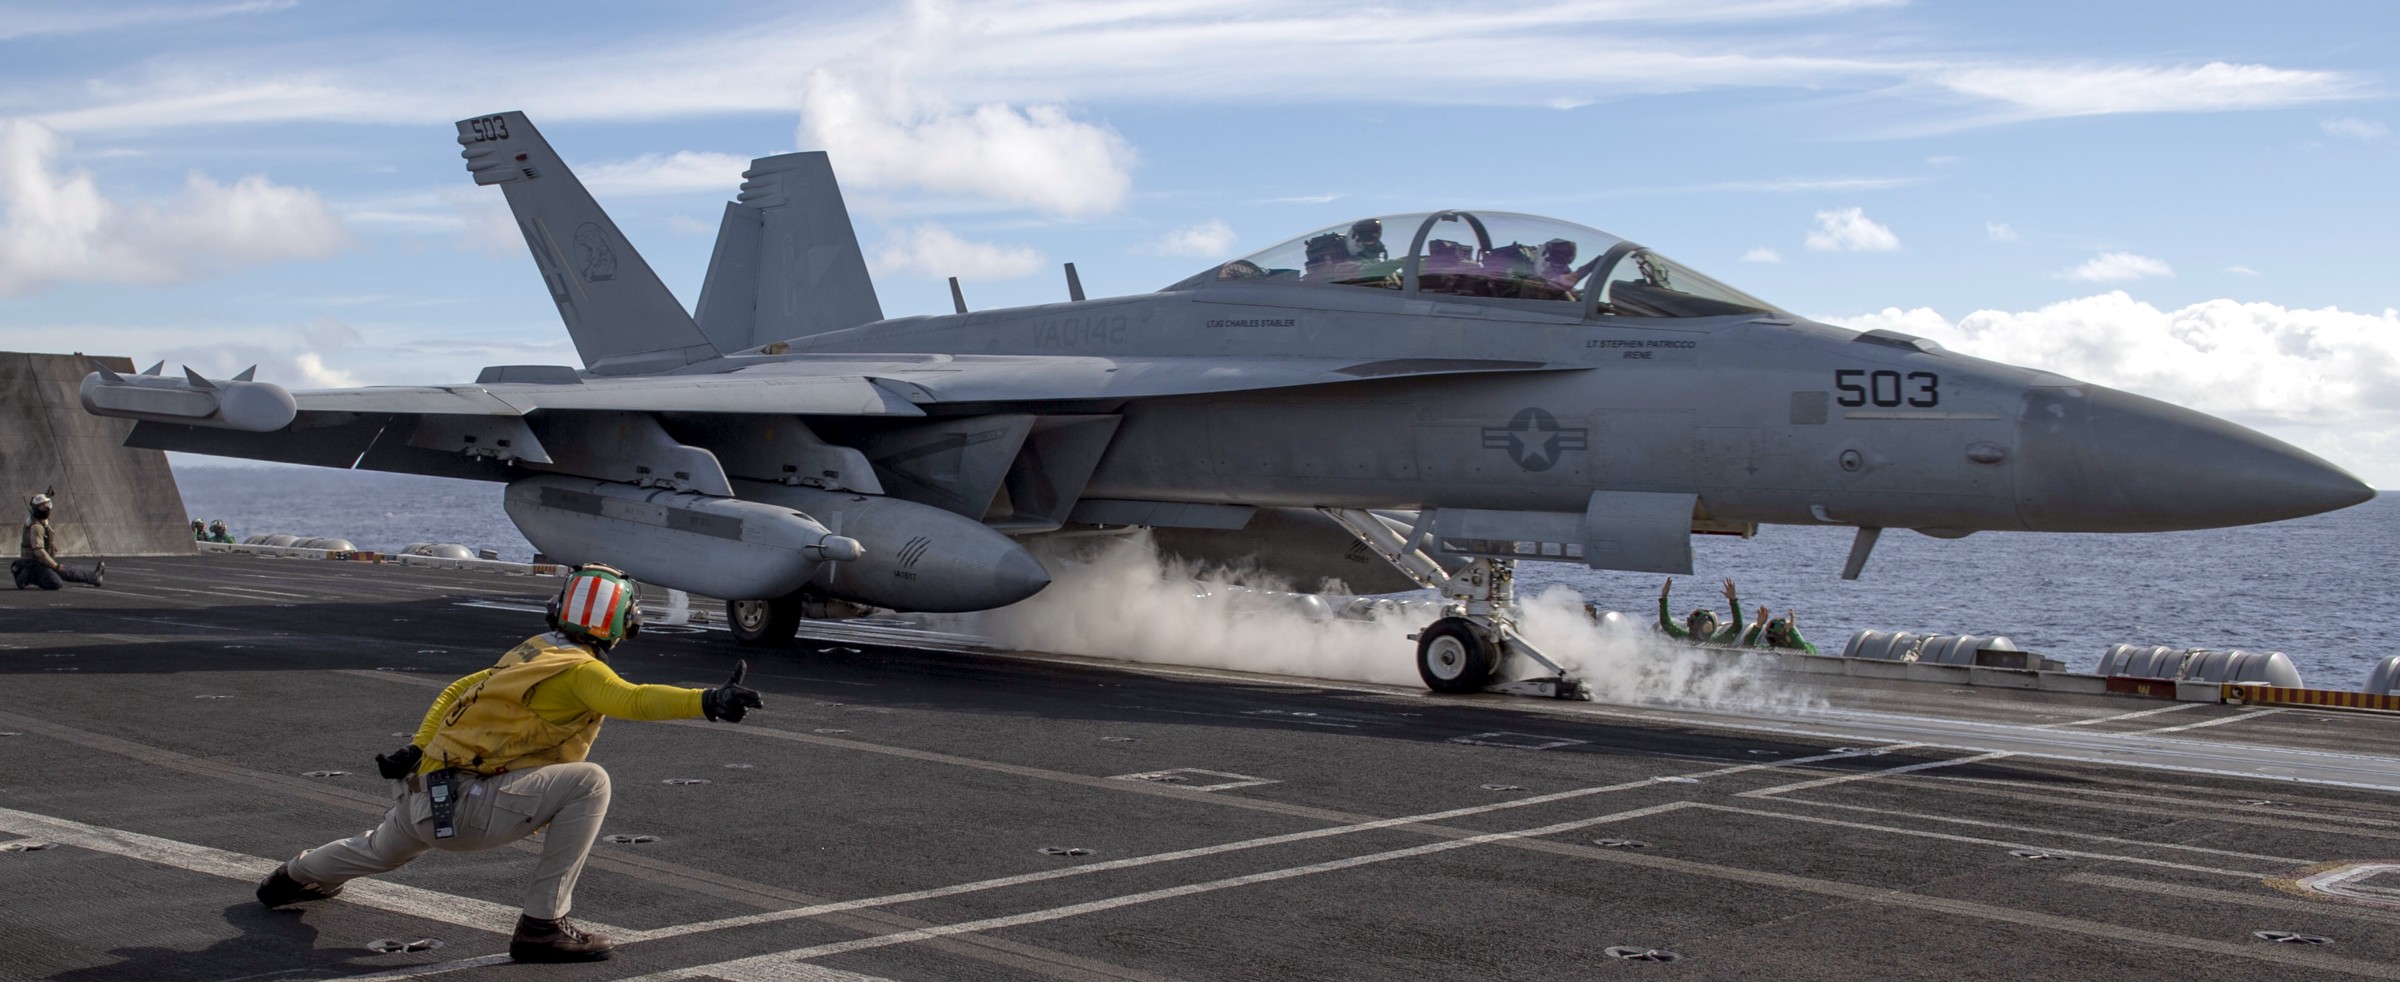 vaq-142 gray wolves electronic attack squadron ea-18g growler us navy cvw-11 uss theodore roosevelt cvn-71 110